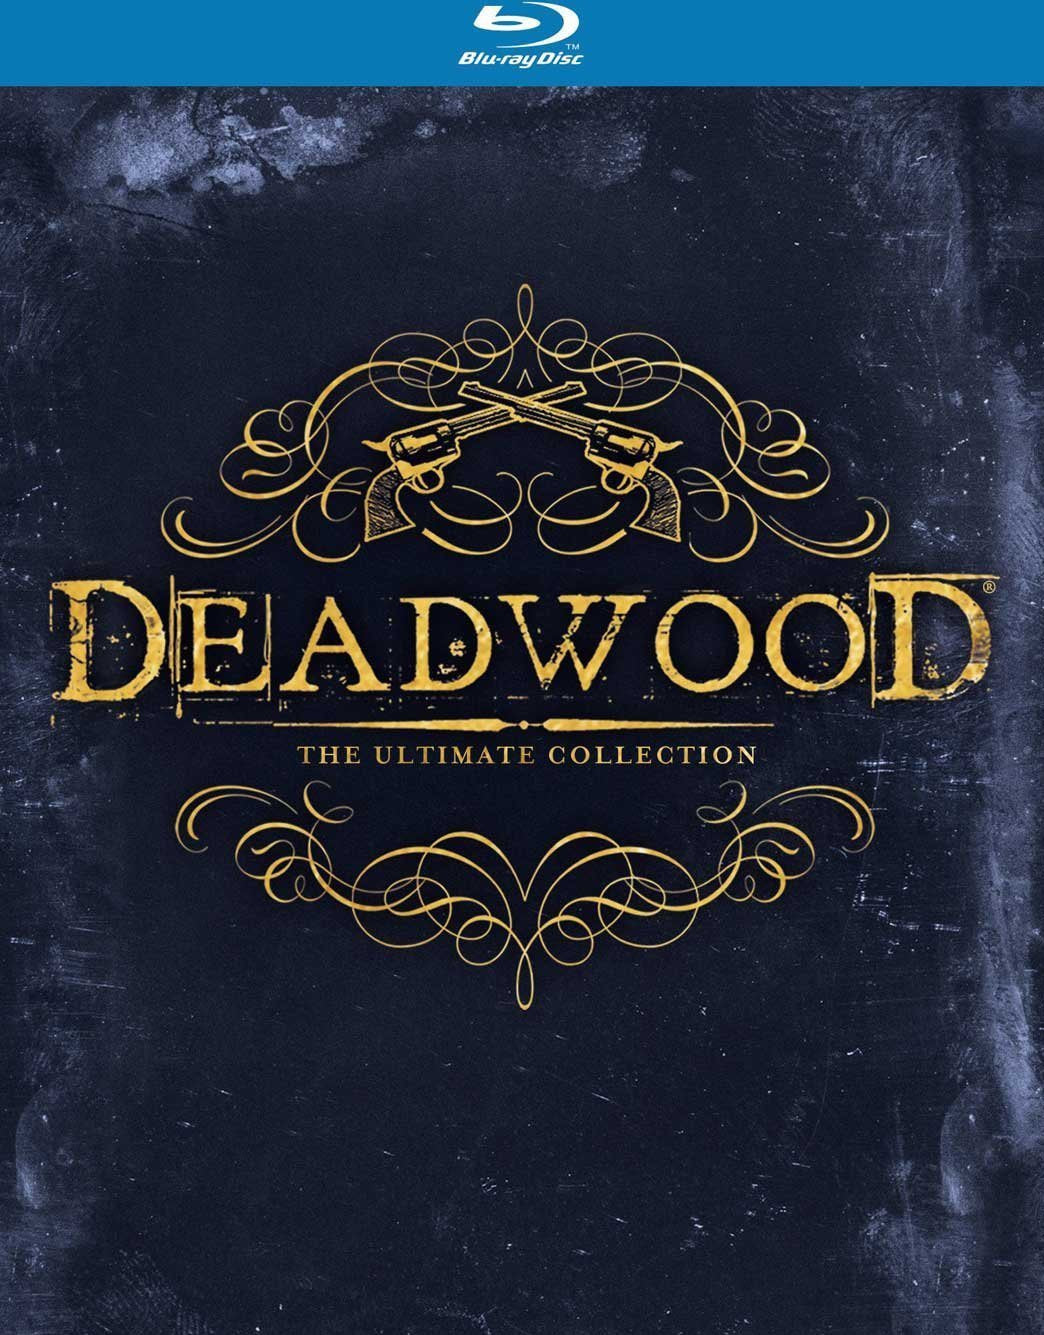 HBO's Deadwood: The Complete Series (2004-2006) Google Play HD code